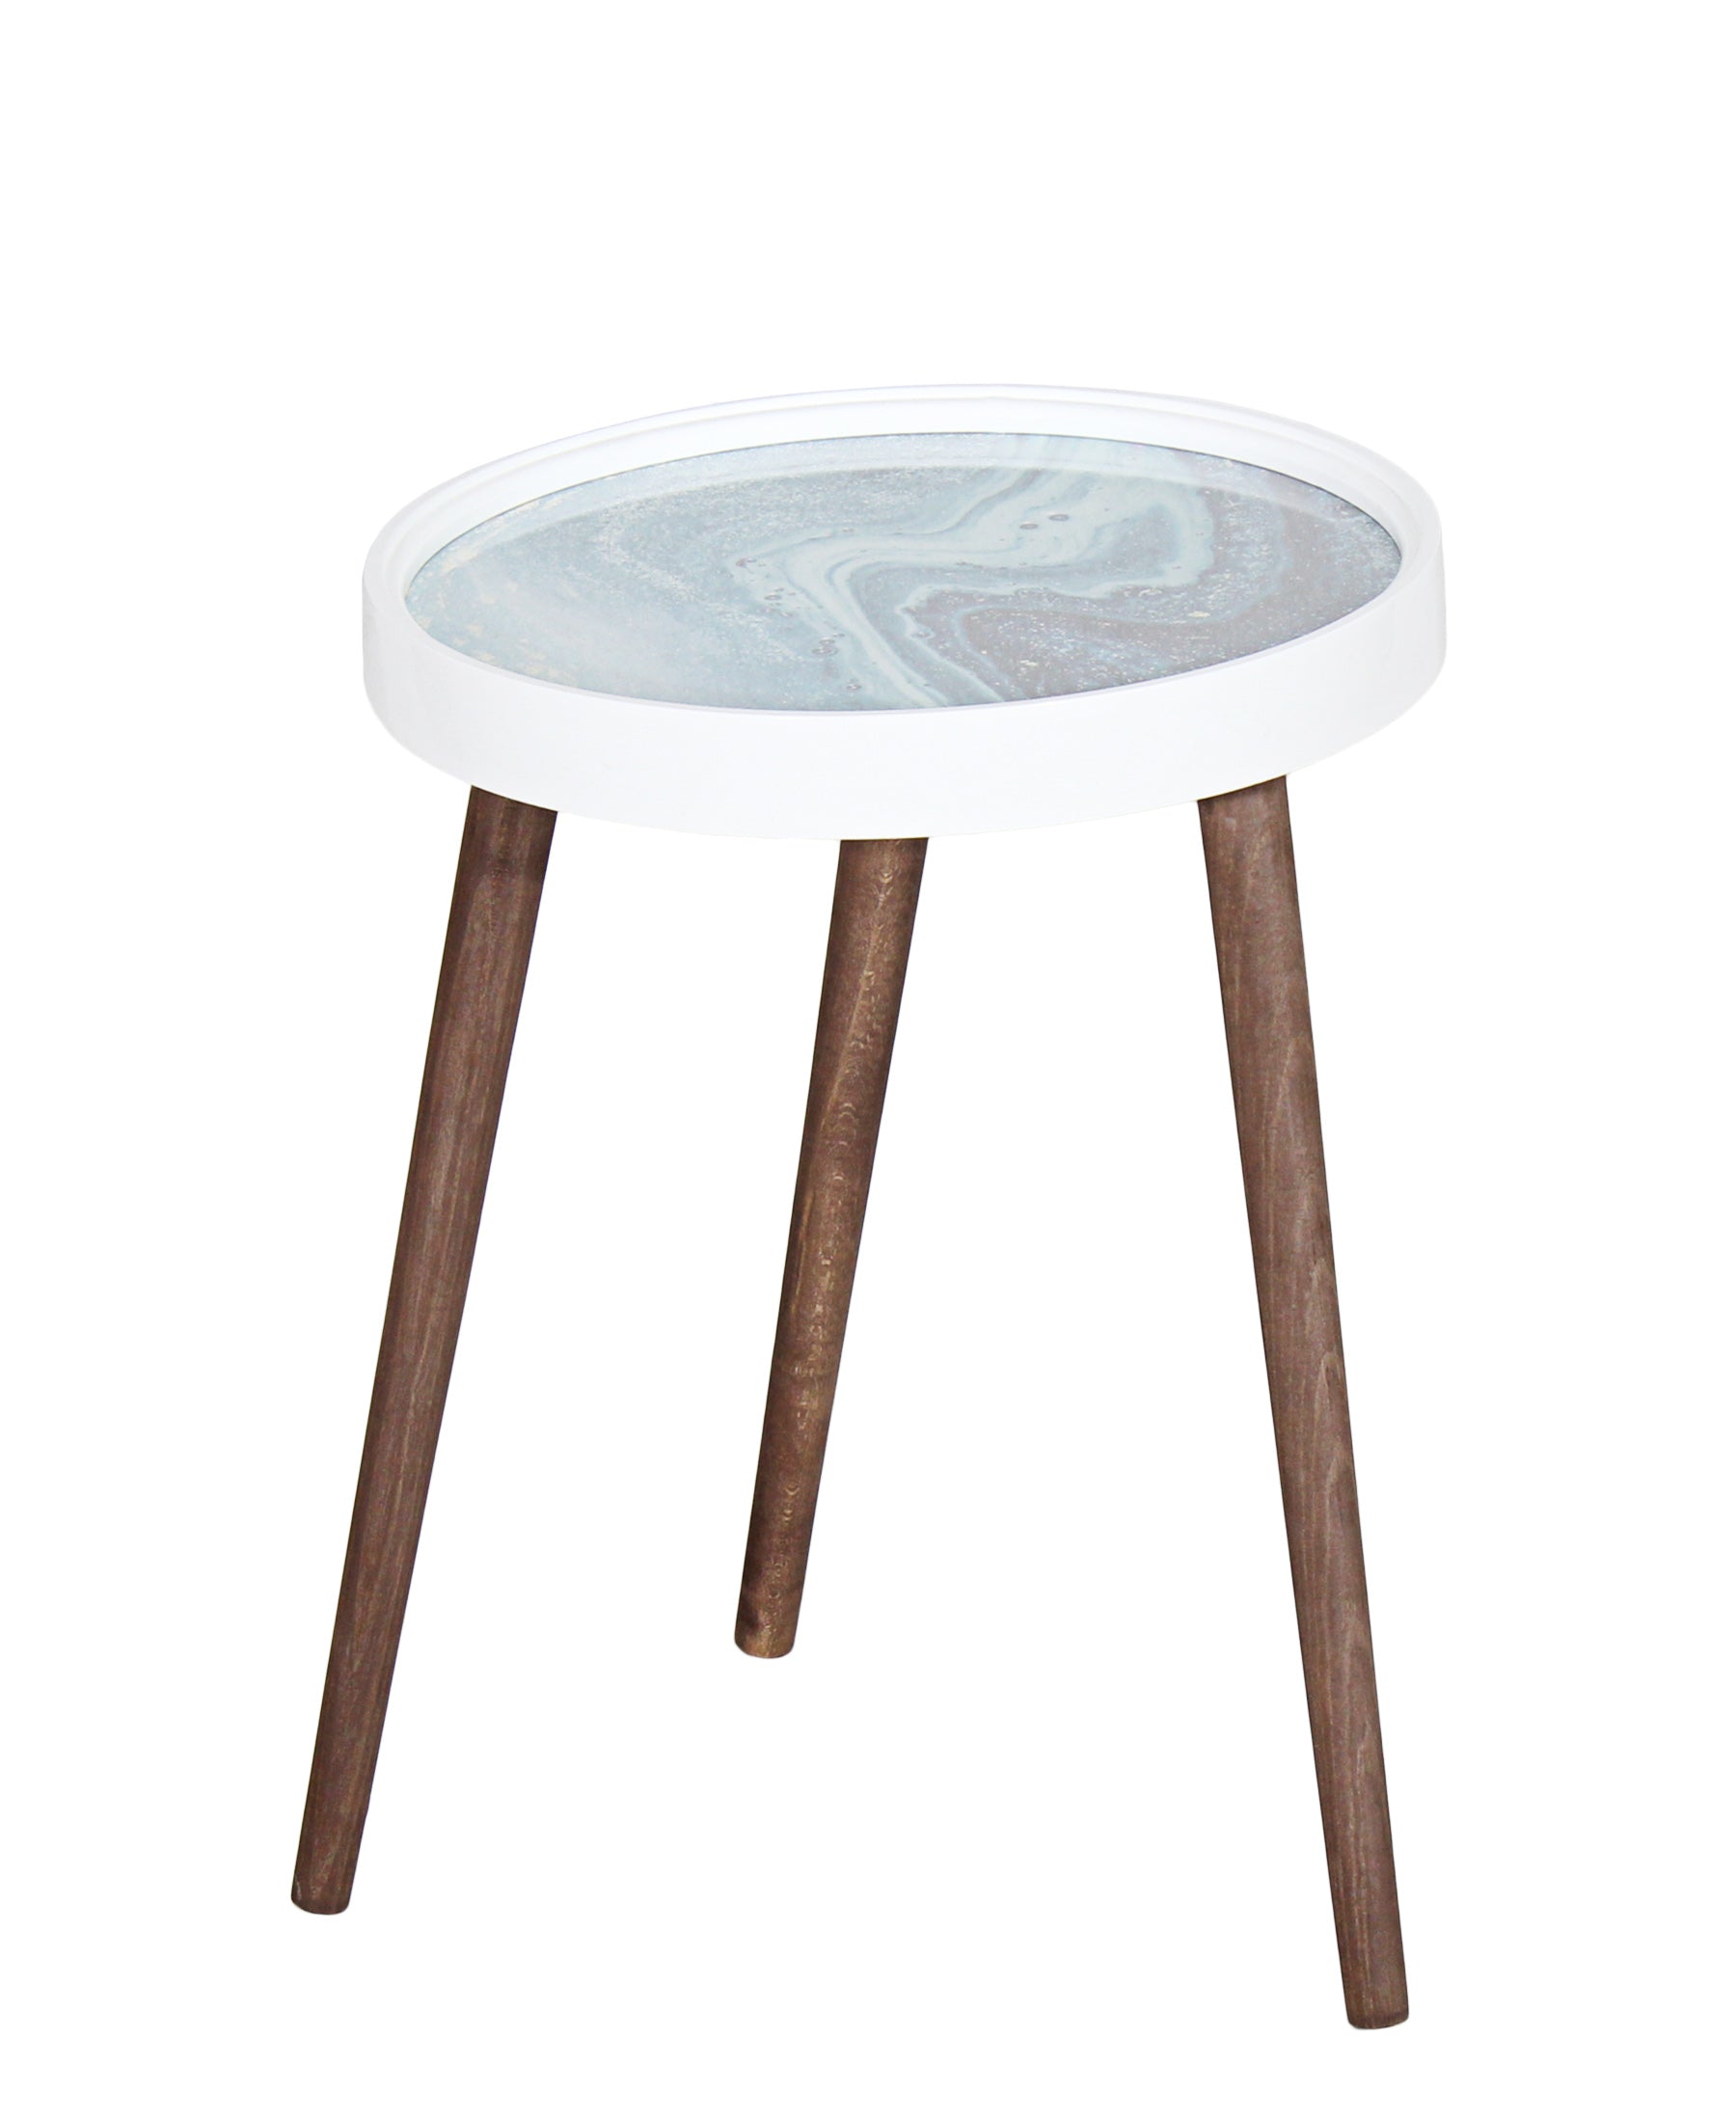 Exotic Designs Side Table - Blue×2